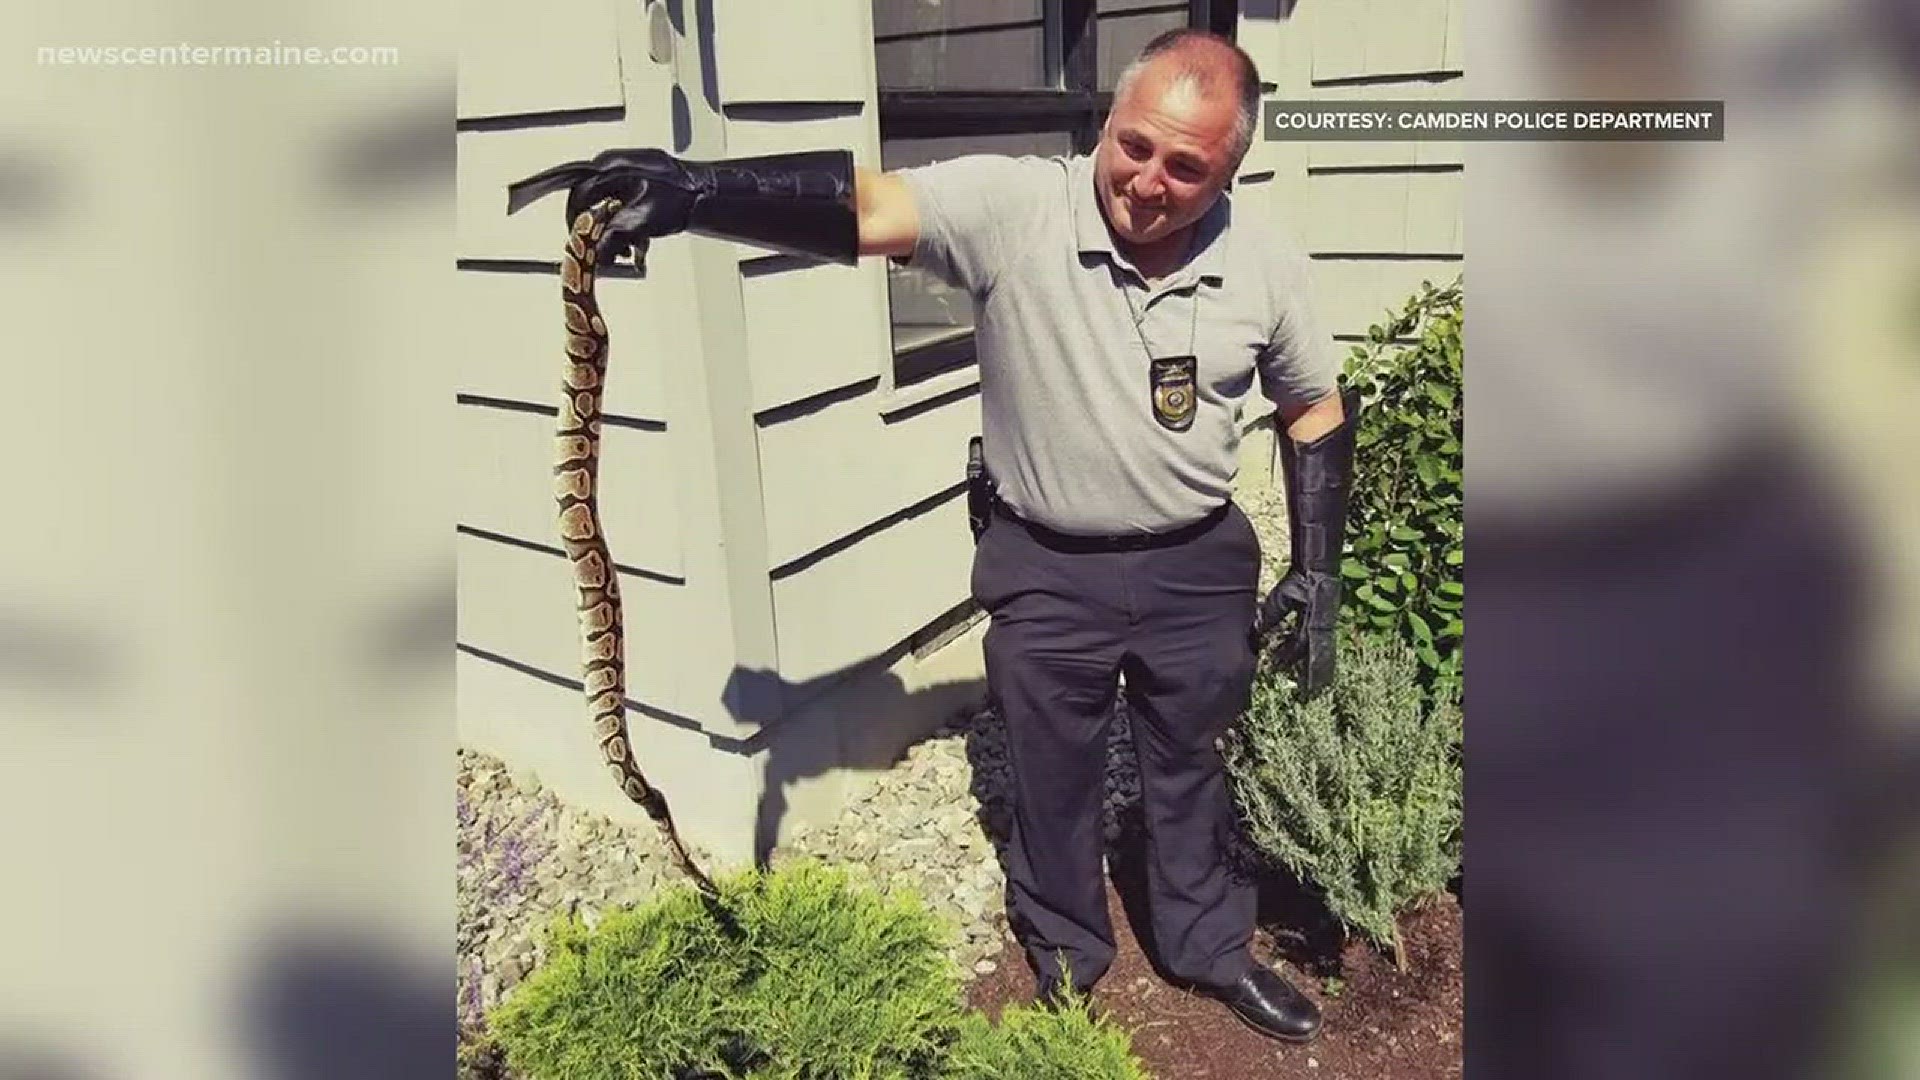 Campden police are looking for large snake